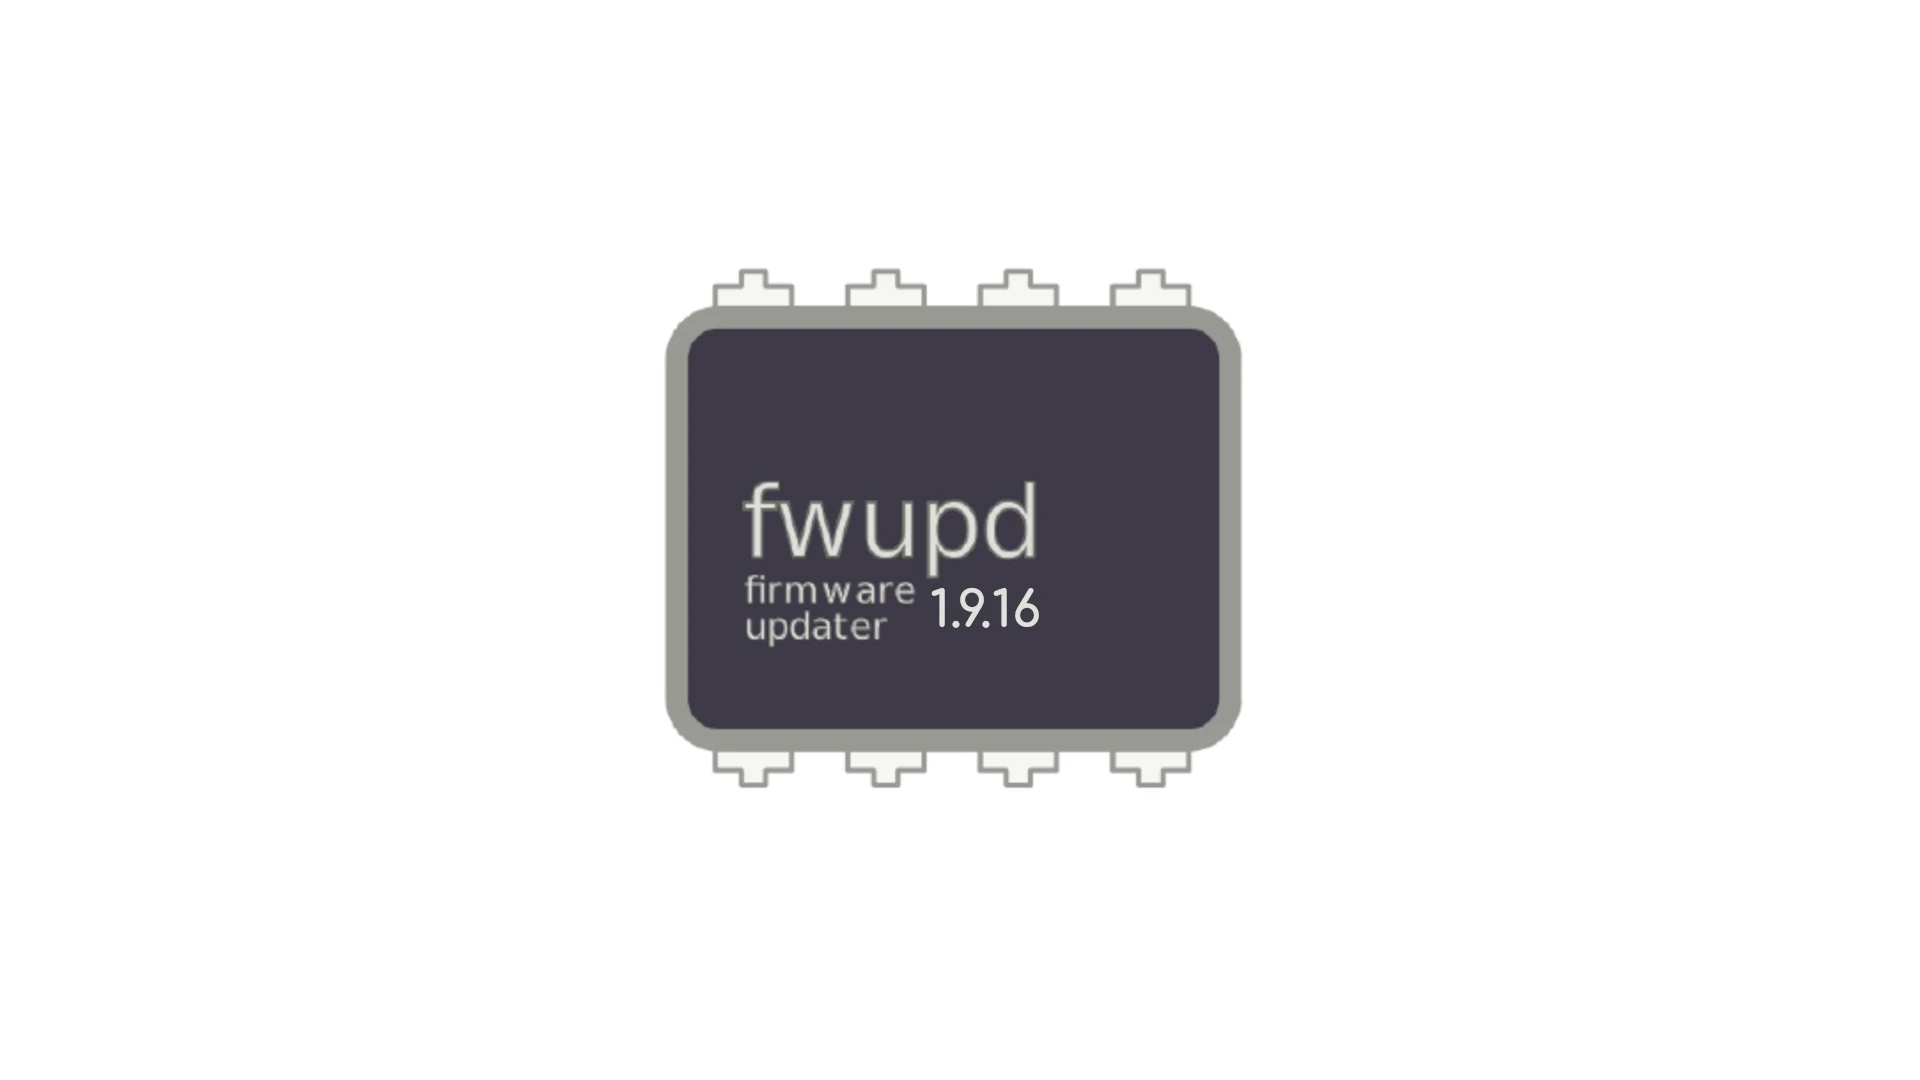 Fwupd 1.9.16 Brings Support for Acer T34 and U33 Docks, Qualcomm Series 5 Devices